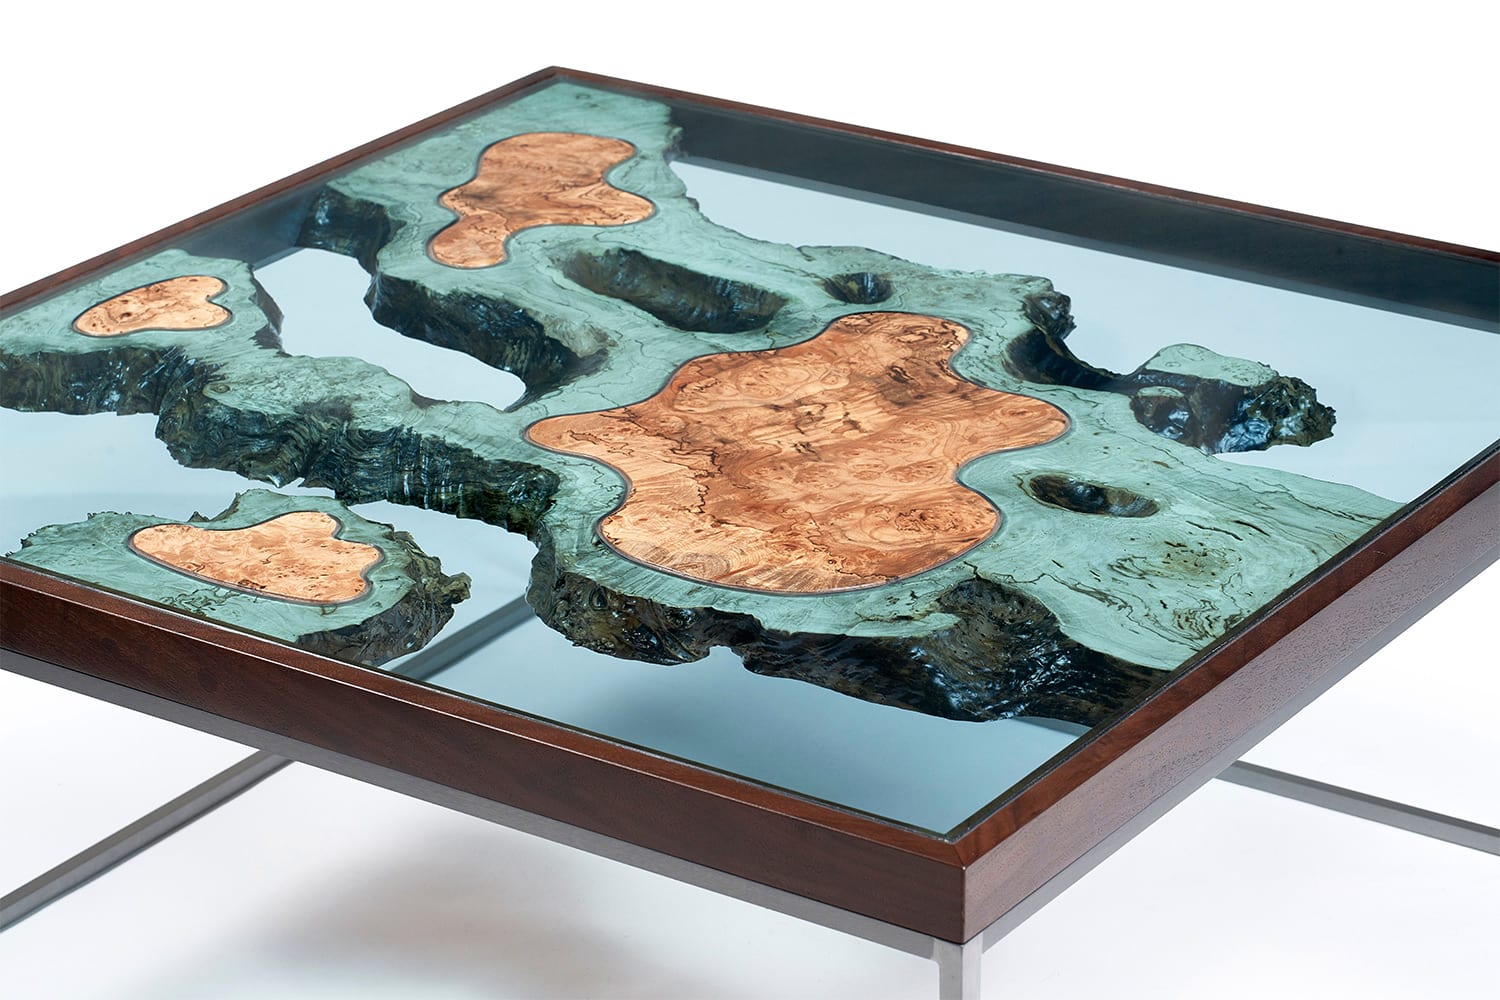 Islands of Wood Float Amidst Sea of Glass in New 'Archipelago' Furniture by Greg Klassen — Colossal